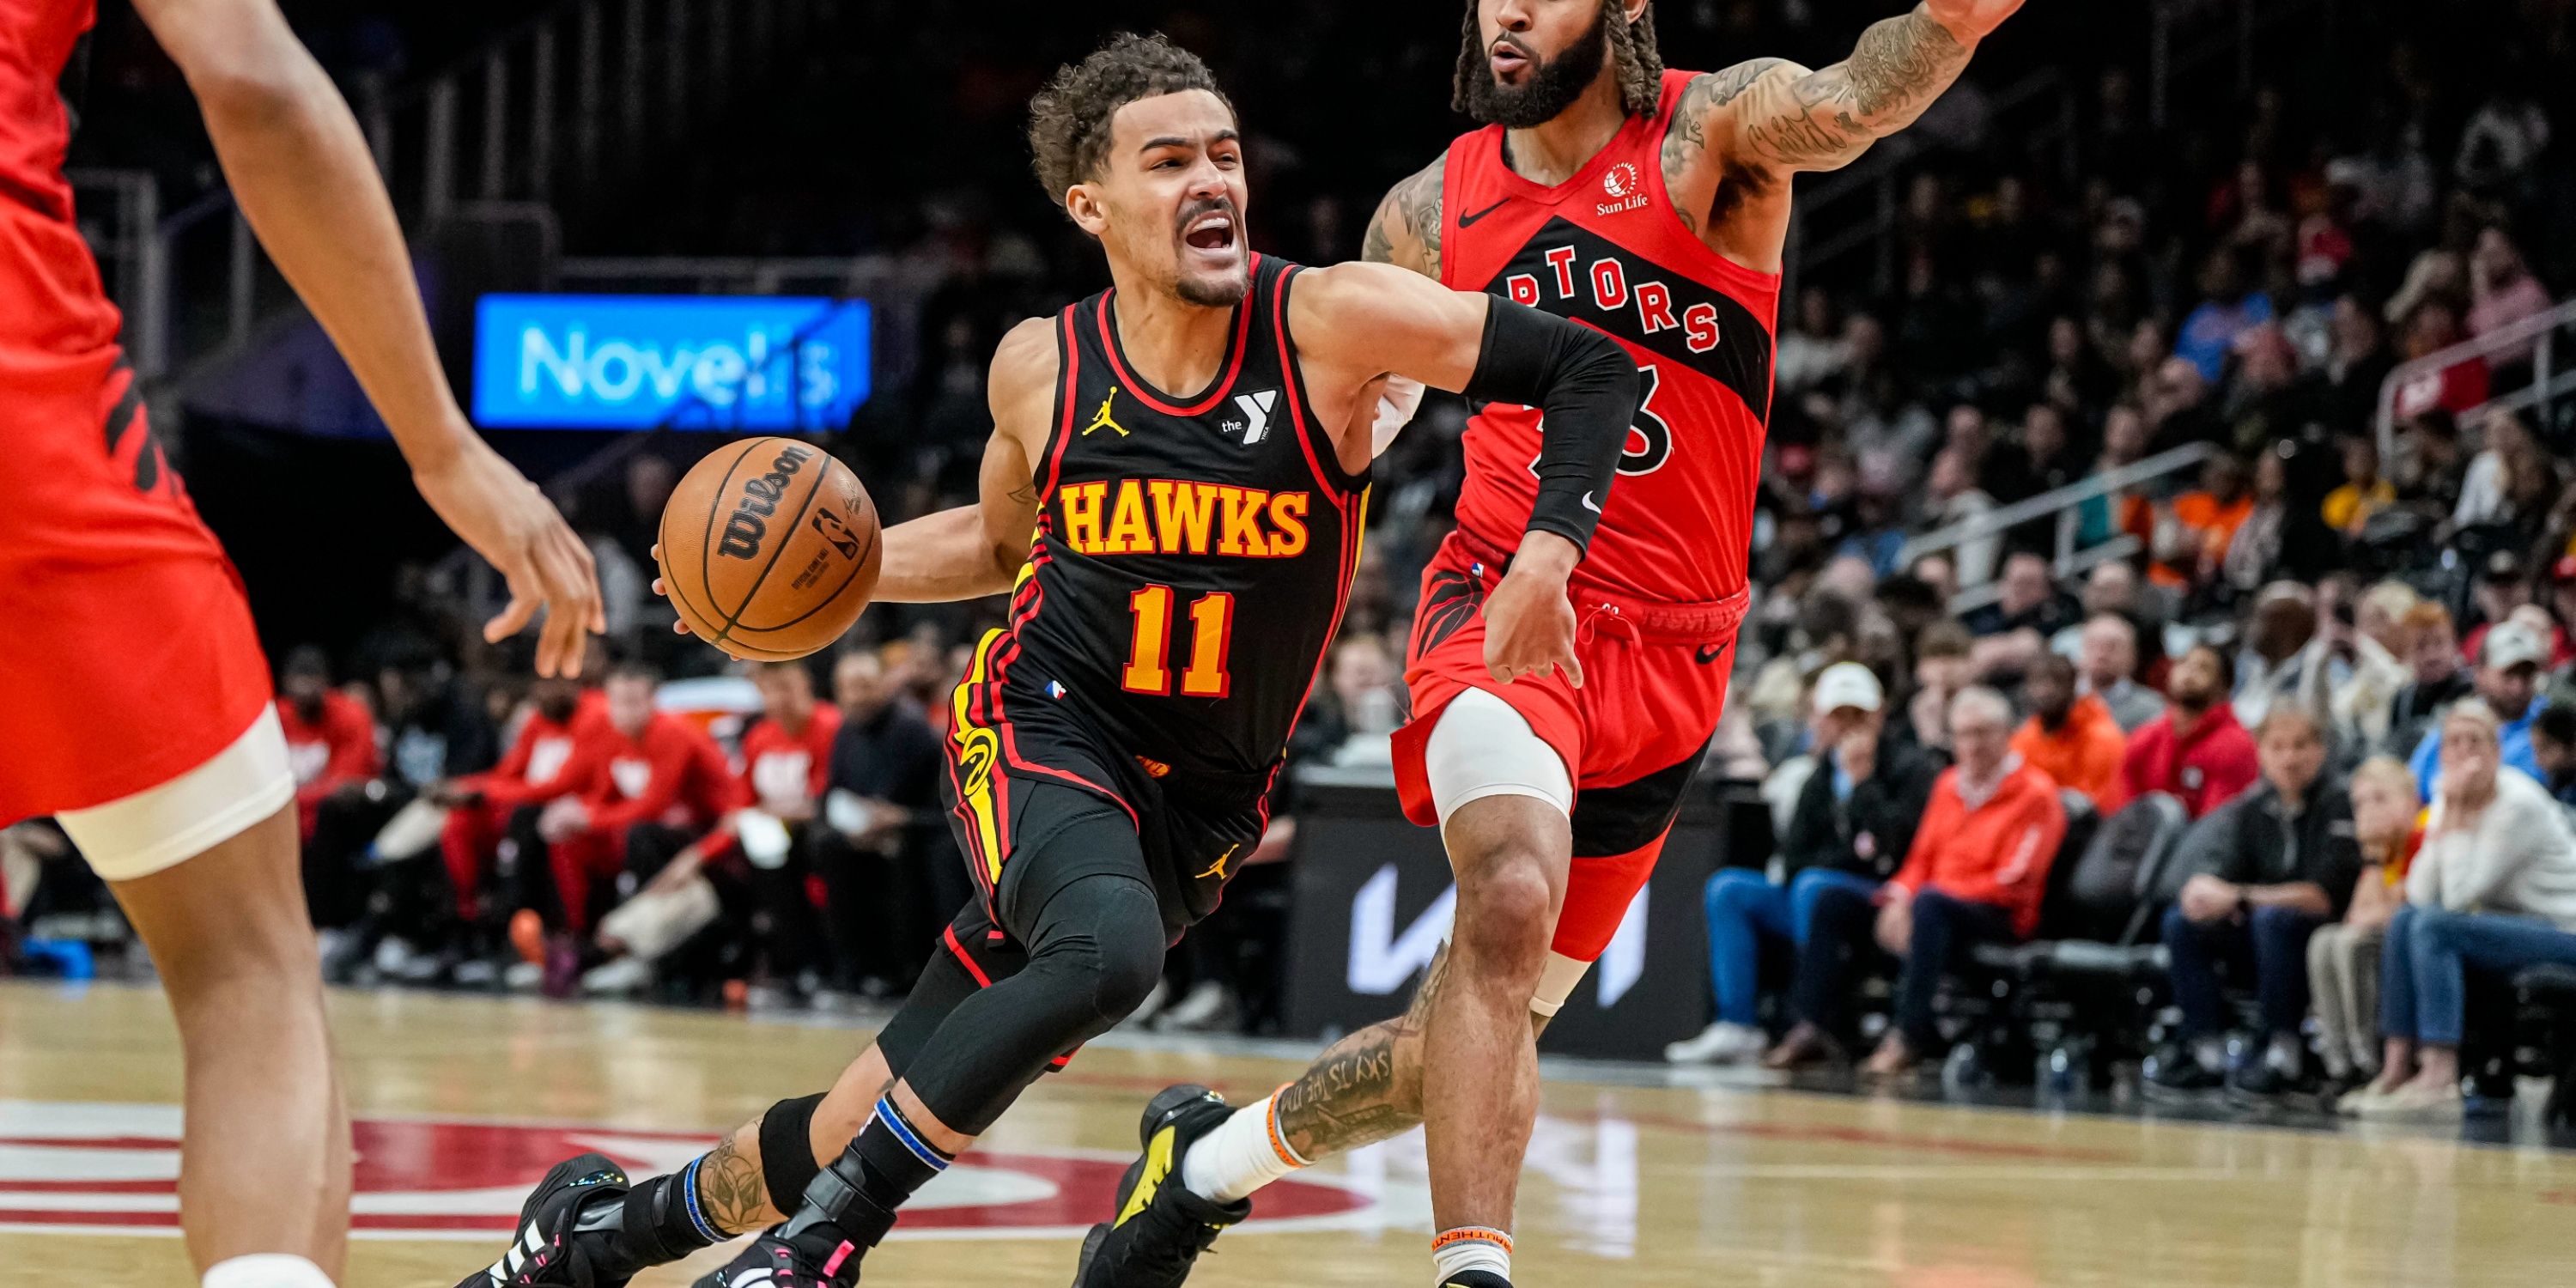 Hawks guard Trae Young drives past his defender